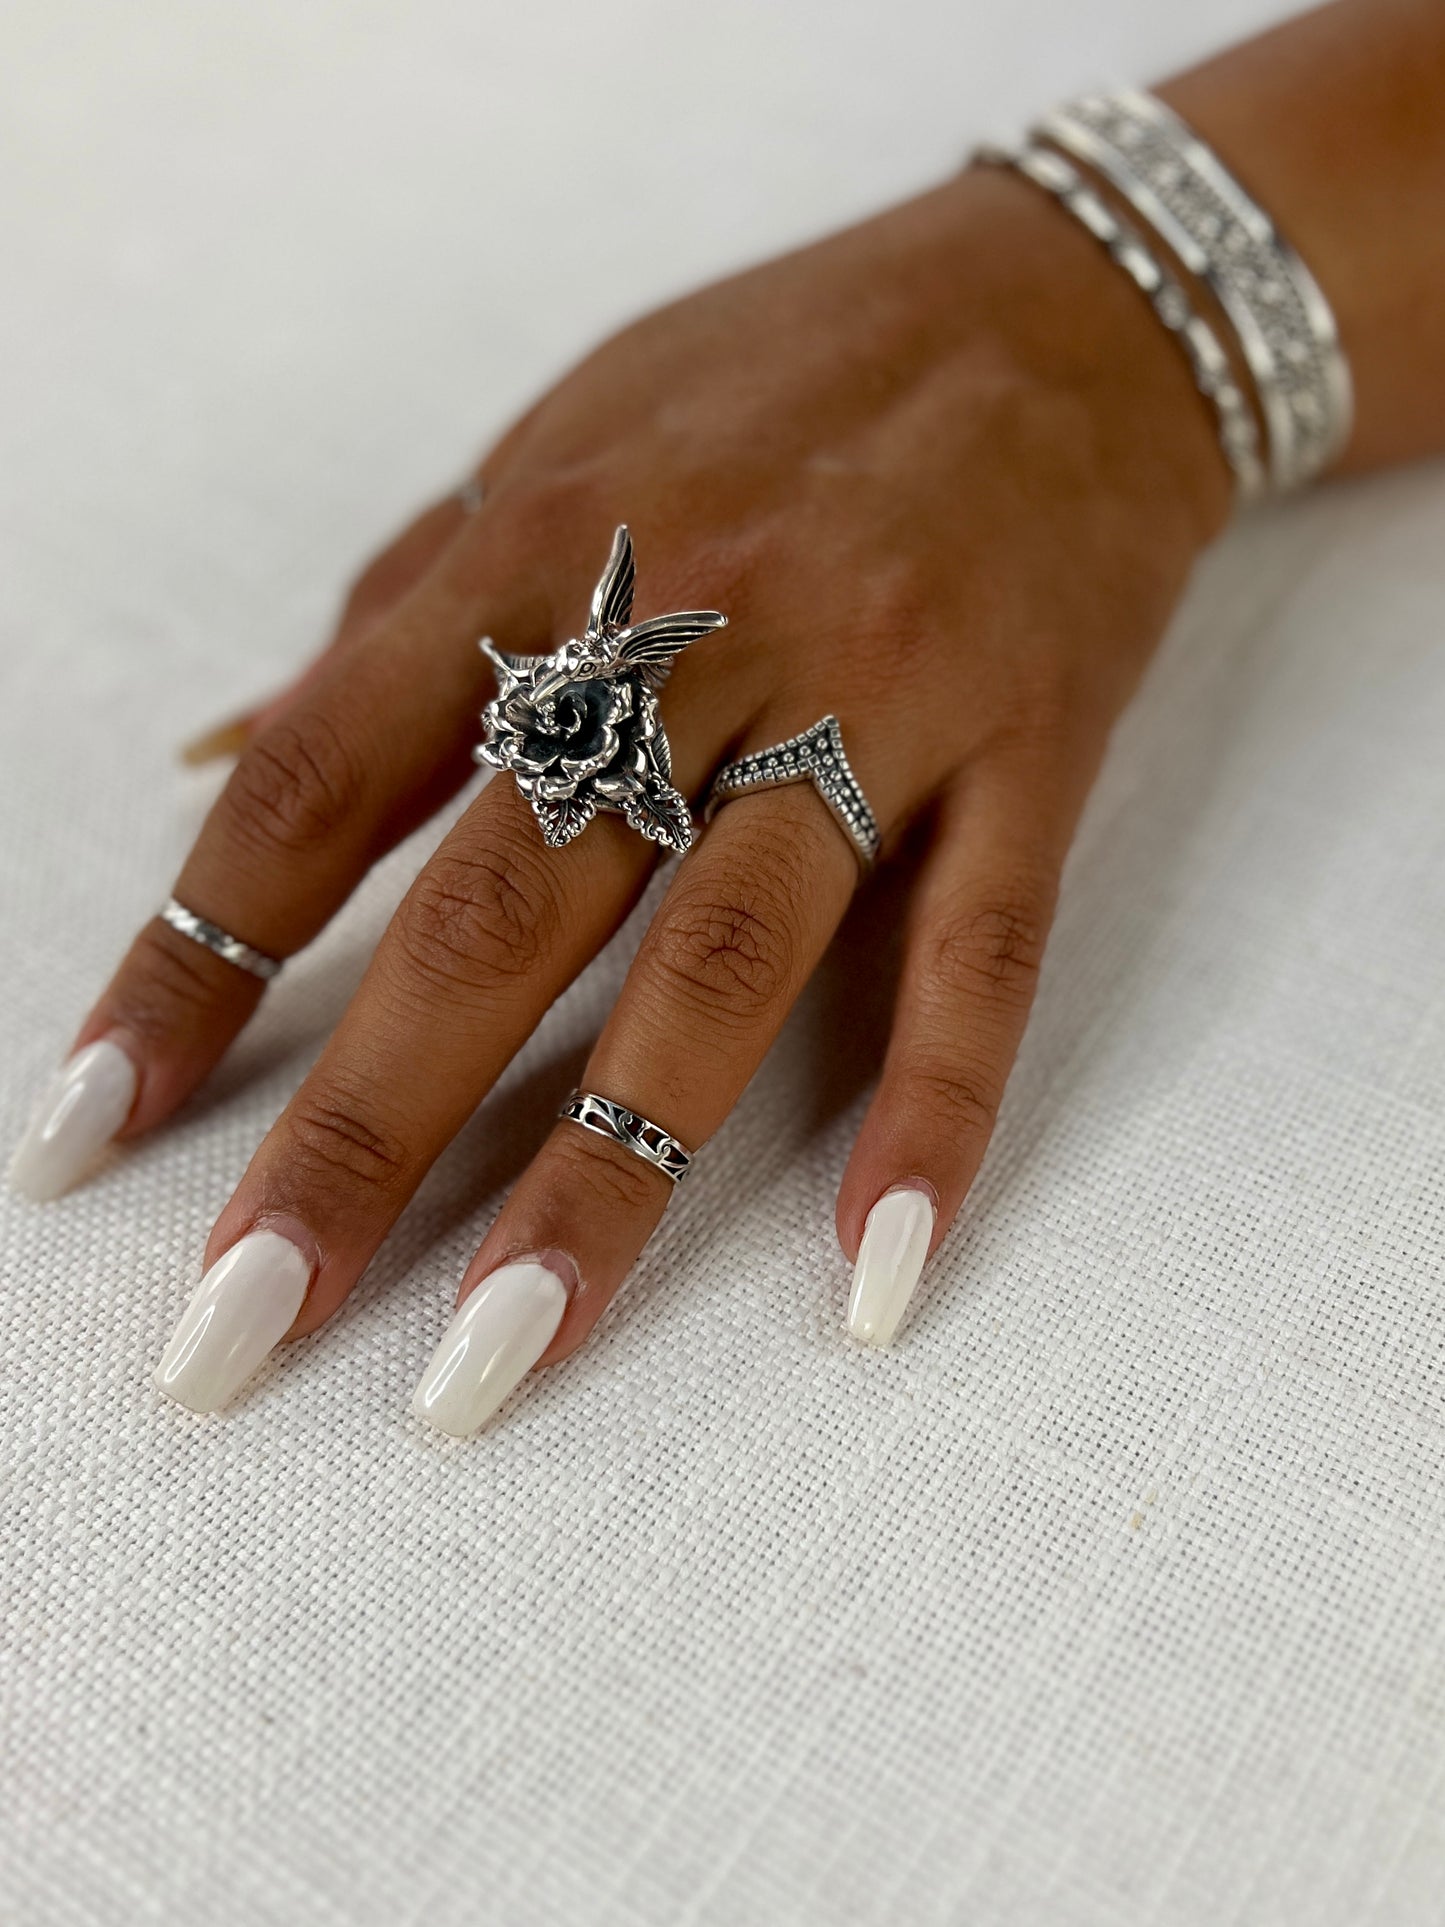 A woman's hand adorned with a delicate Hummingbird with Flower Ring, perfectly contrasting against her white nails reminiscent of delicate flowers in nature.